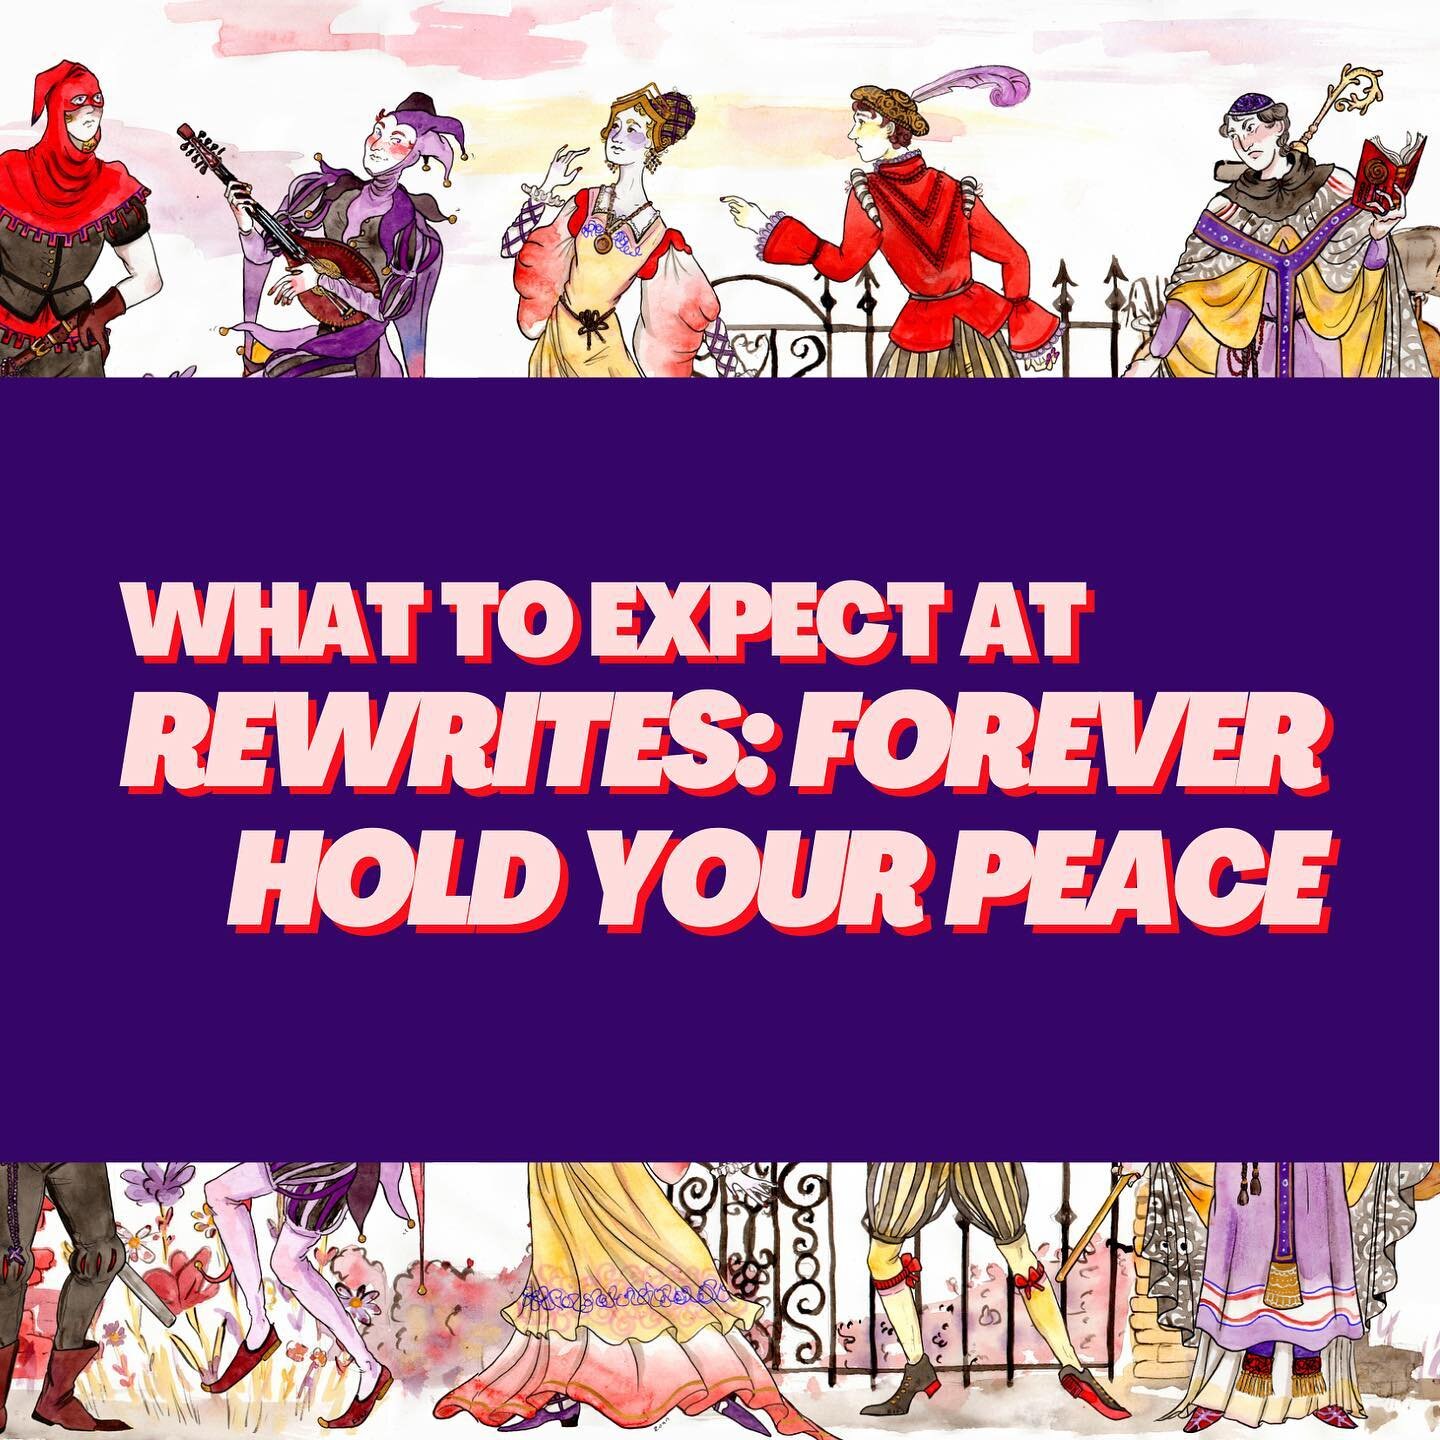 REWRITES: Forever Hold Your Peace, is 90 minutes of polyamory romcom jukebox opera fun - no intermission.

Purchase your goodies at the start of the show and bring them into the theatre to enjoy - because it's much more fun to sip a beer and enjoy a 